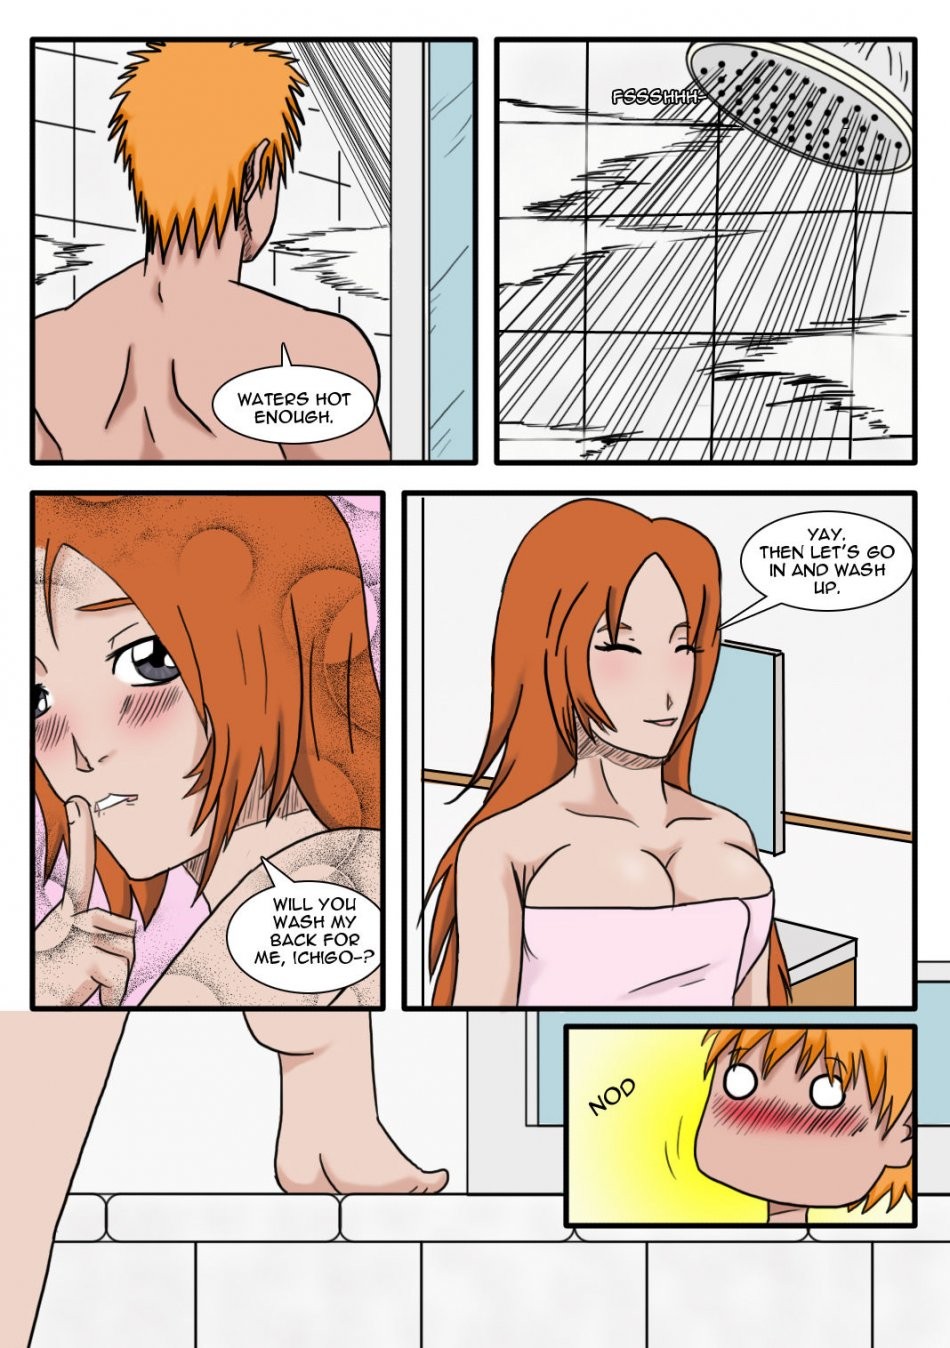 IchiHime - Second Night porn comic picture 5